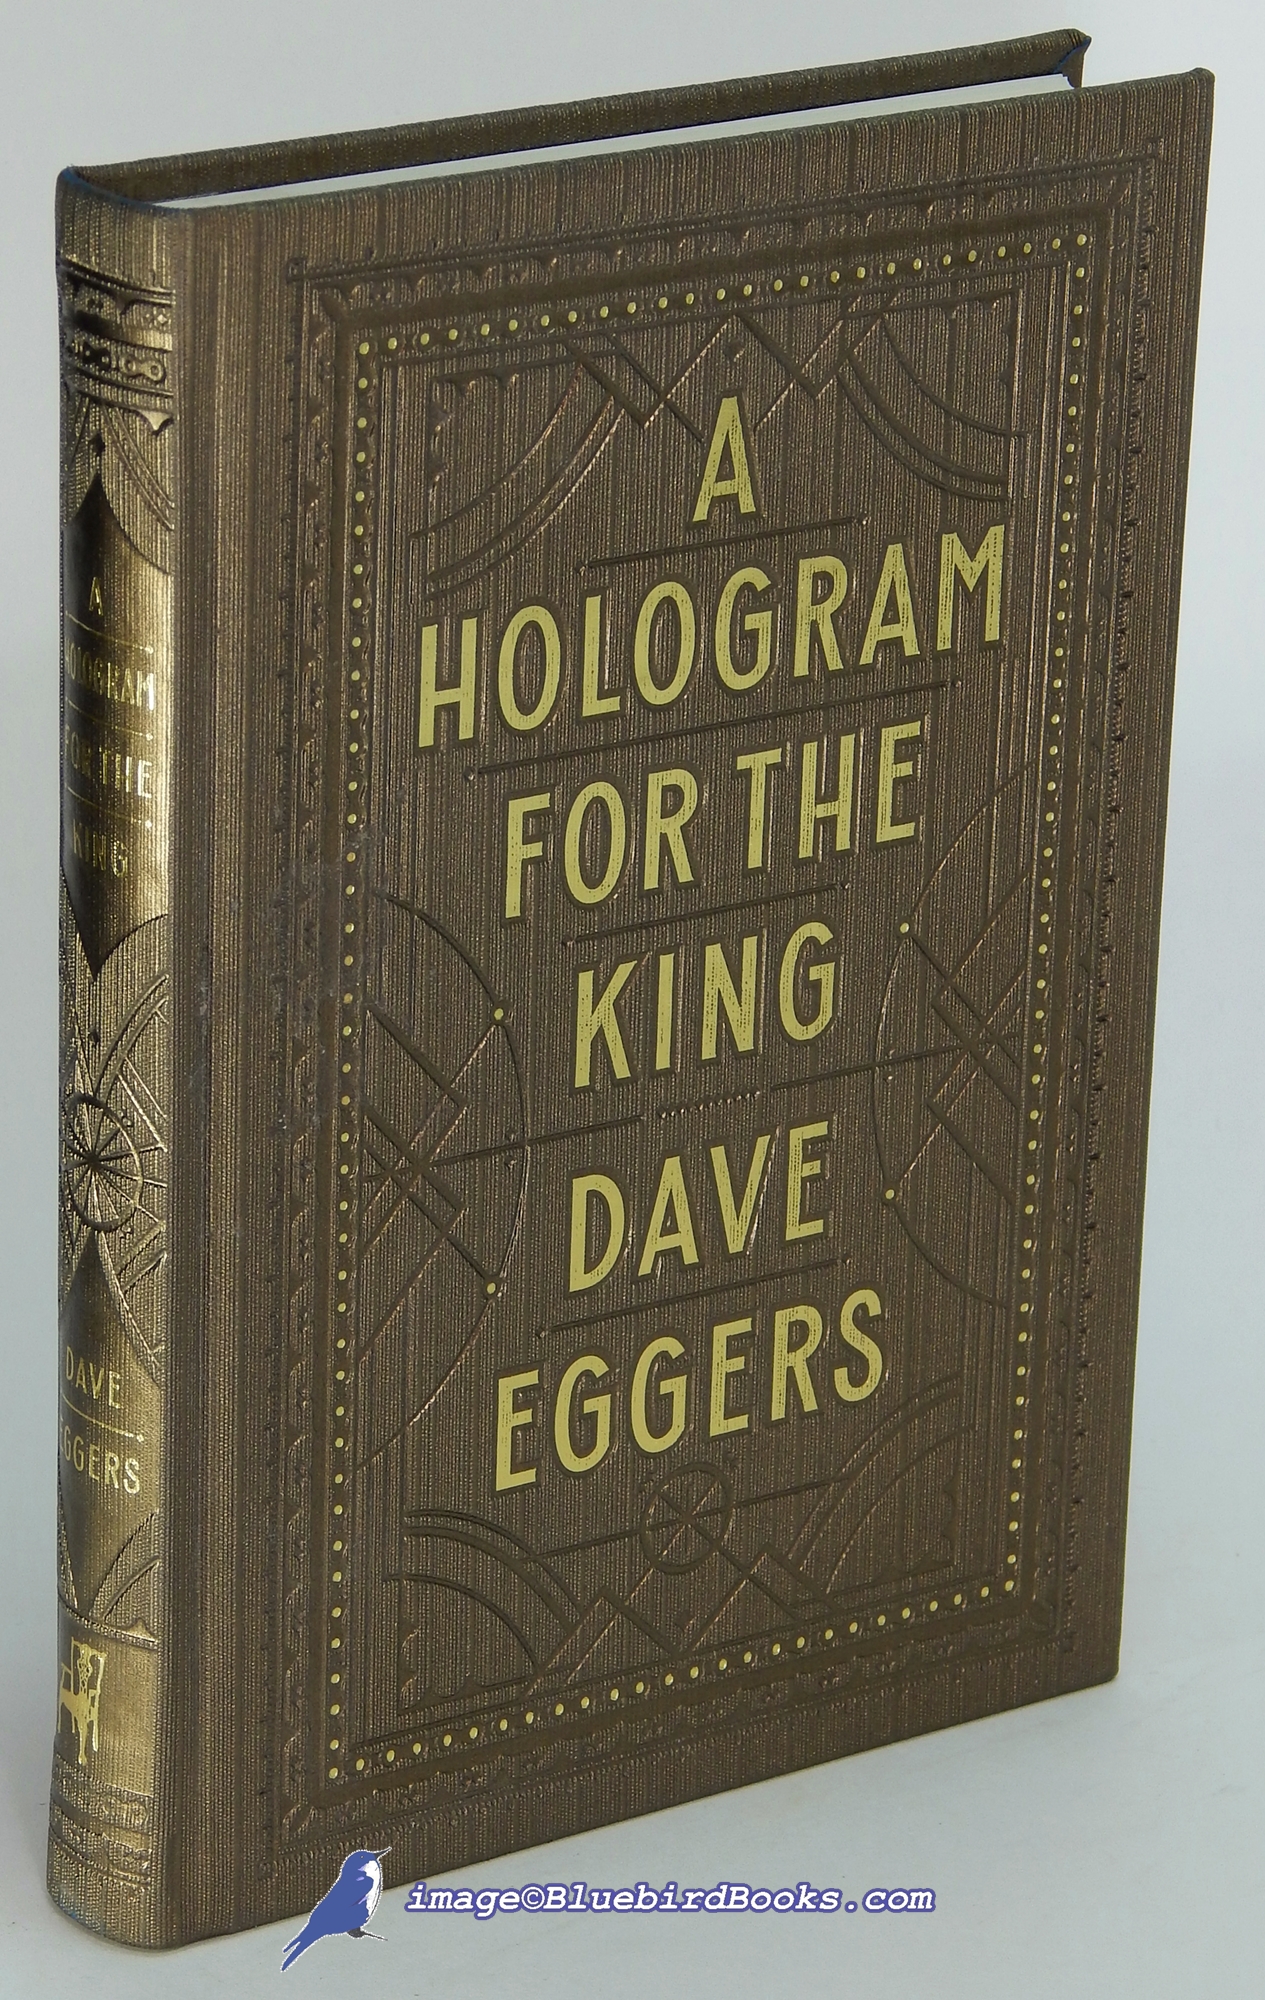 EGGERS, DAVE - A Hologram for the King